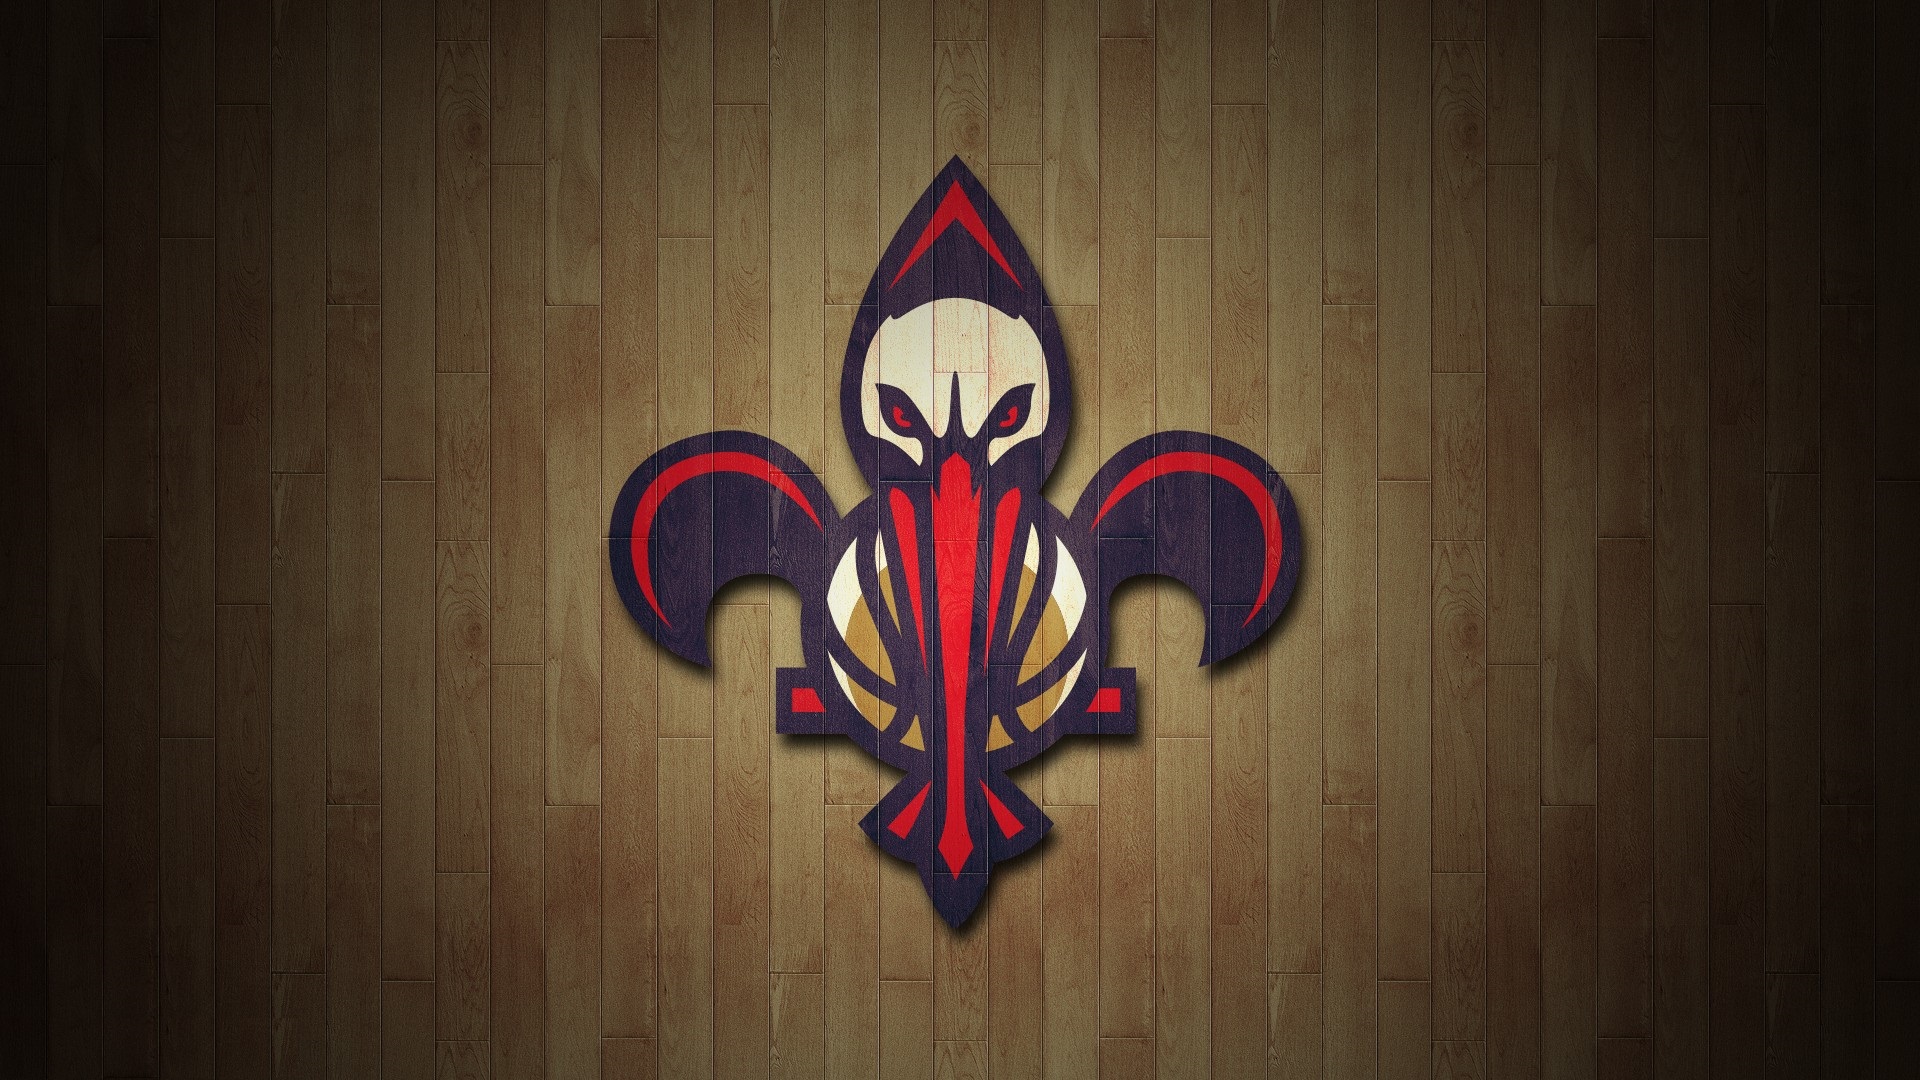 New Orleans Pelicans Wallpaper For Mac Backgrounds with high-resolution 1920x1080 pixel. You can use this wallpaper for your Desktop Computer Backgrounds, Windows or Mac Screensavers, iPhone Lock screen, Tablet or Android and another Mobile Phone device